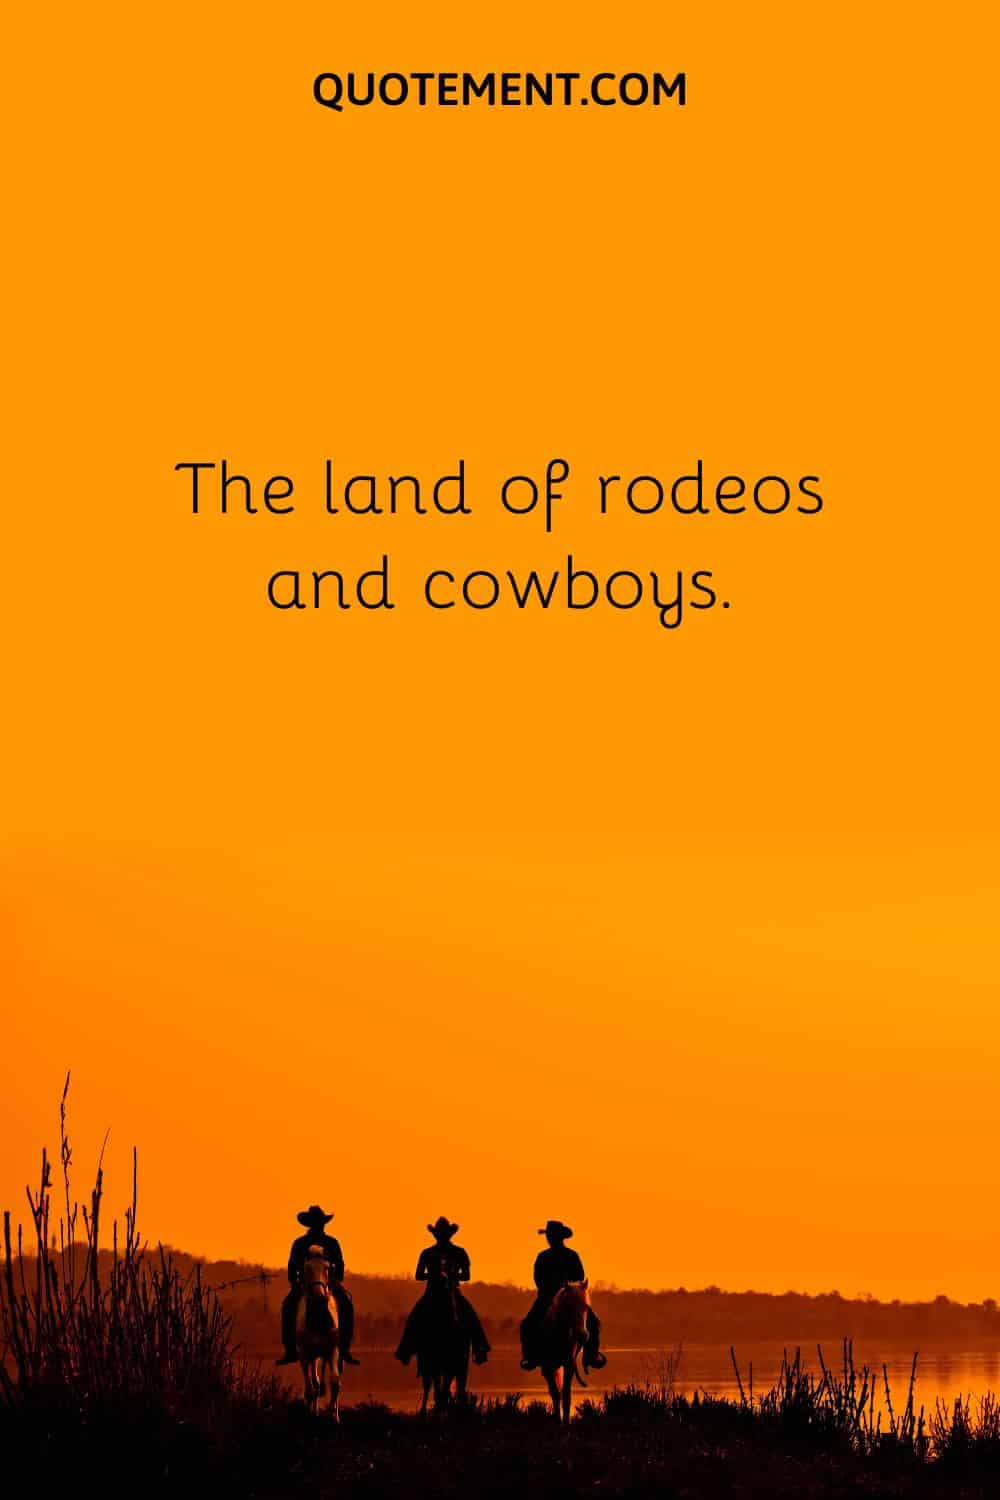 The land of rodeos and cowboys.